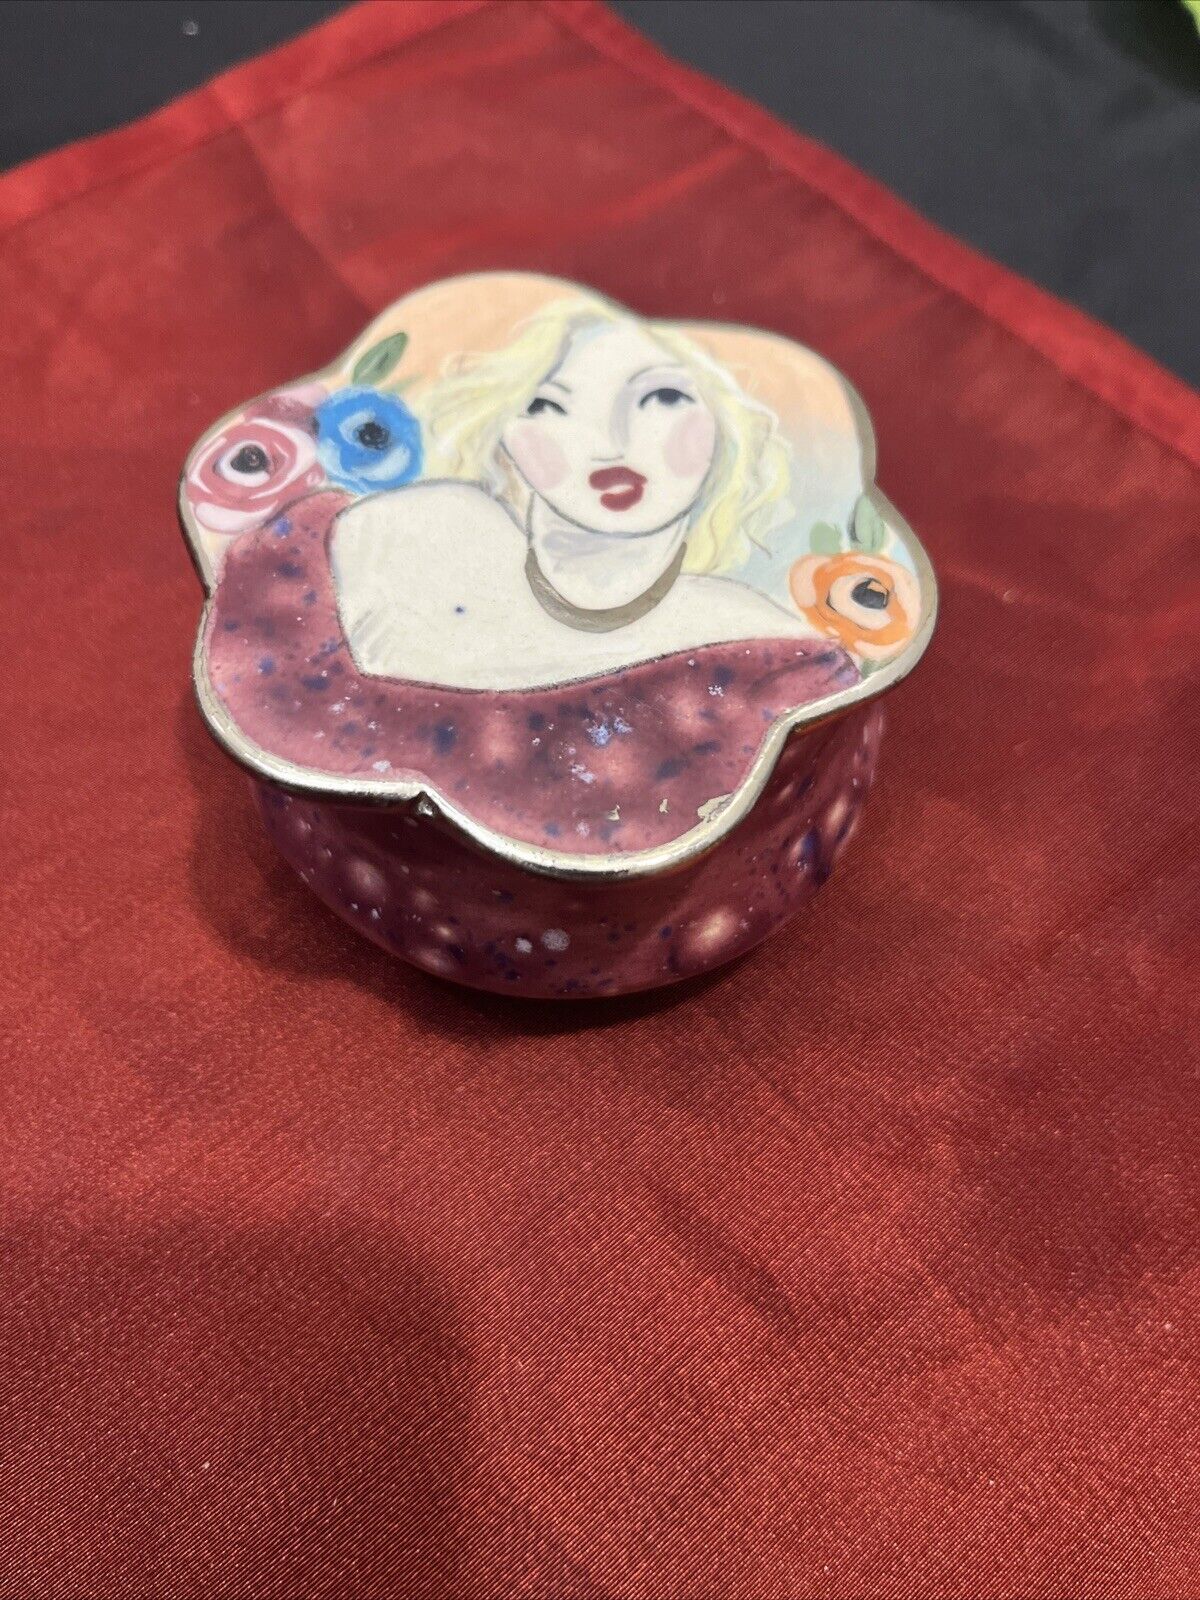 Unique Handcrafted Trinket Box/brooch Hand-Painted Ceramic 2”H 2.75 Inch W